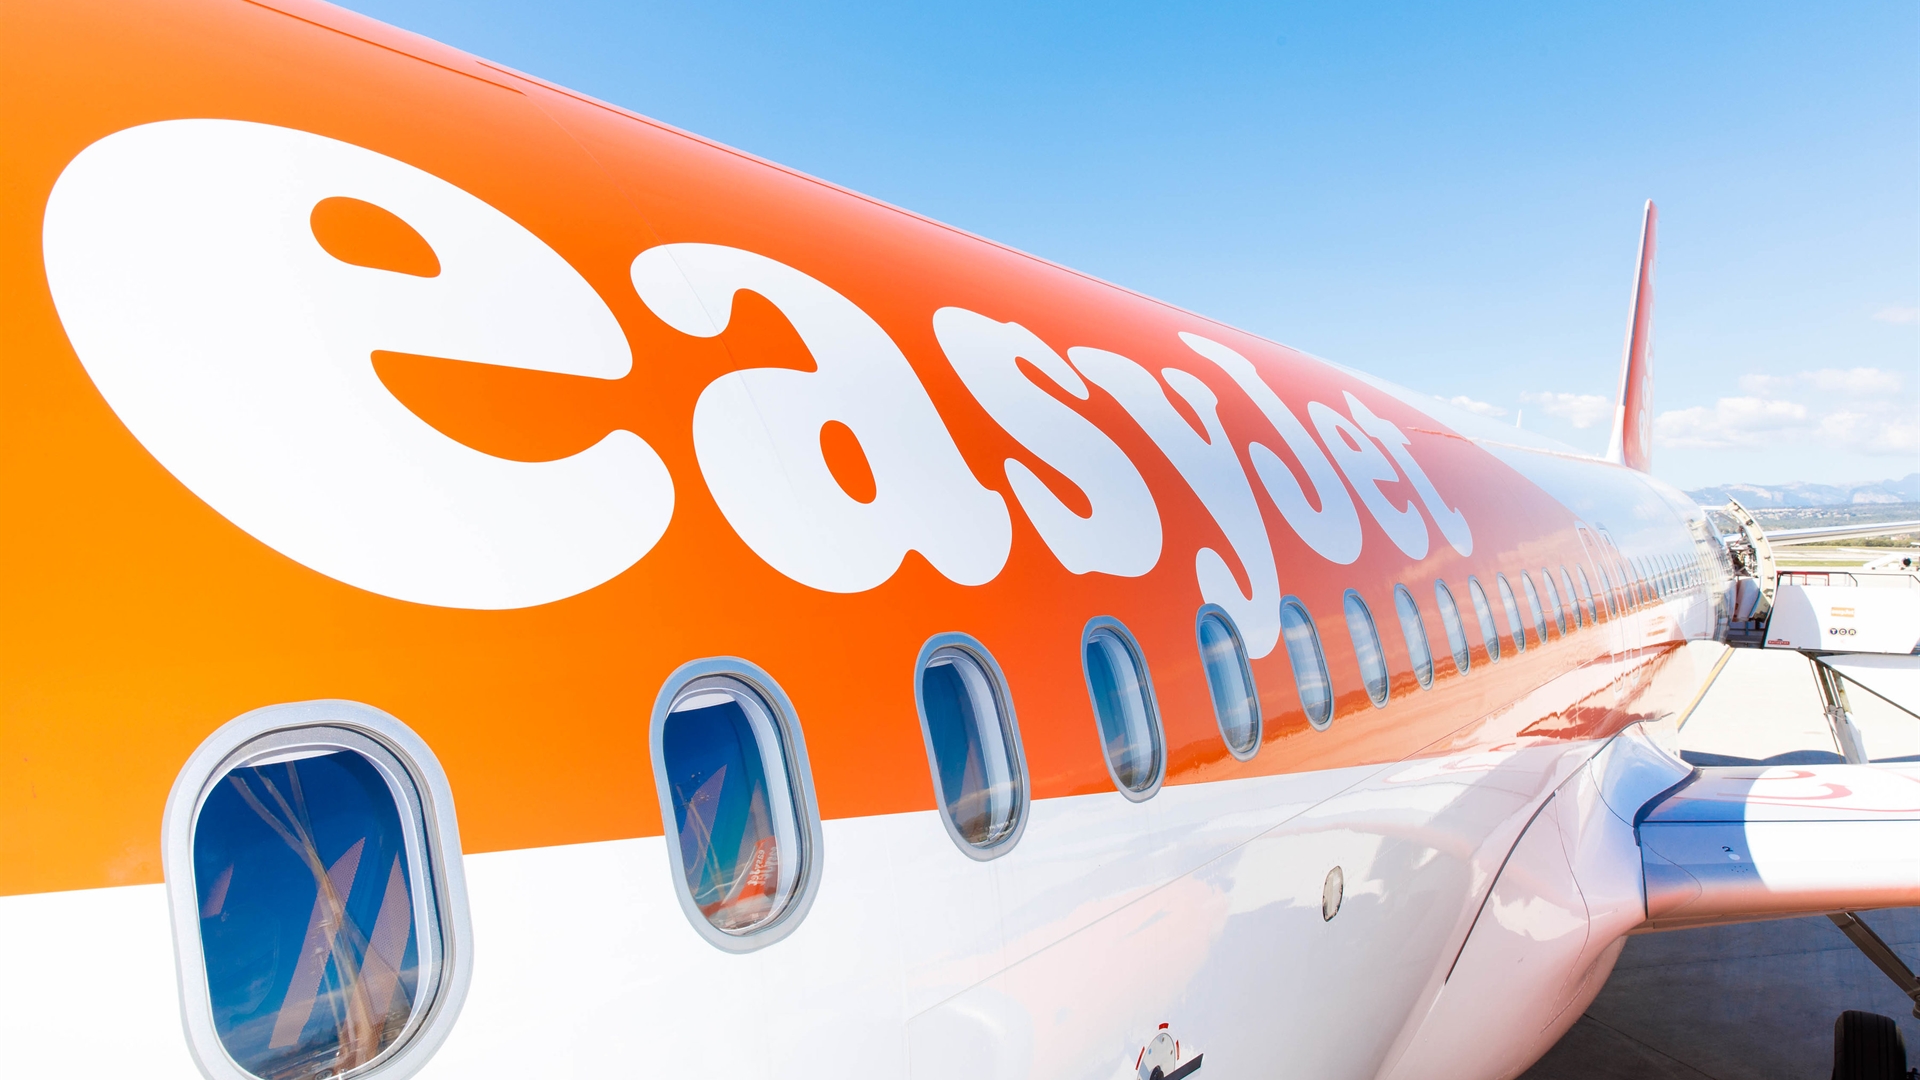 easyJet launches new routes for winter 2022